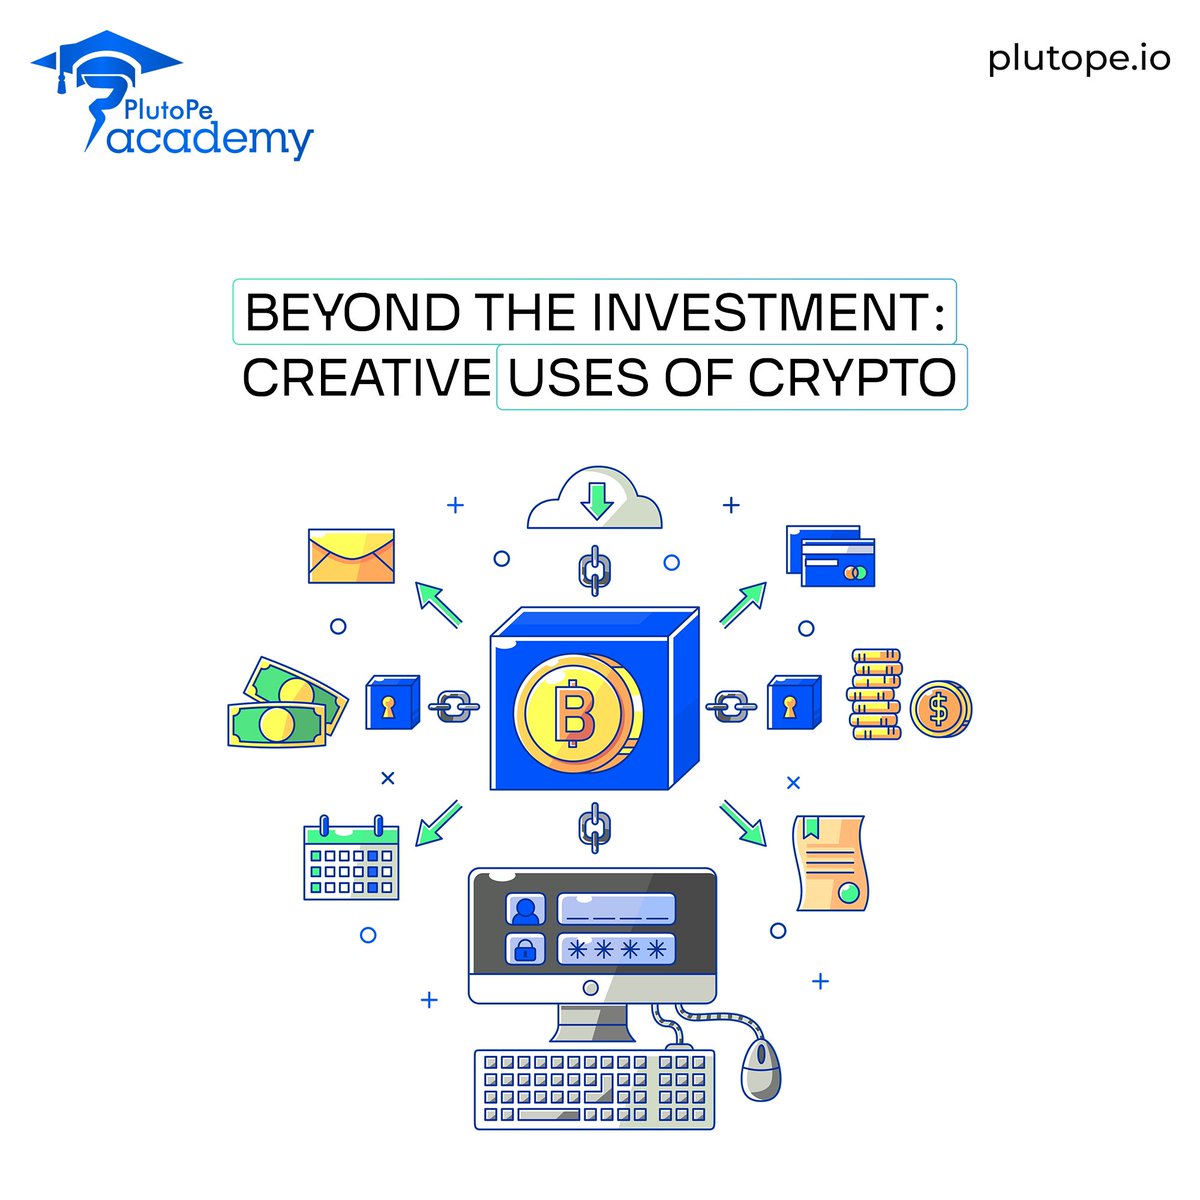 Magic Money Goes Beyond Shopping! ✨ Remember GPay & Paytm? Now imagine 'magic internet money'doing more than buying things! That's Creative Crypto Uses:💀 🤔Think: GPay & Paytm are cool wallets for easy payments. 'Magic money' can be even cooler: Tip your favorite artists